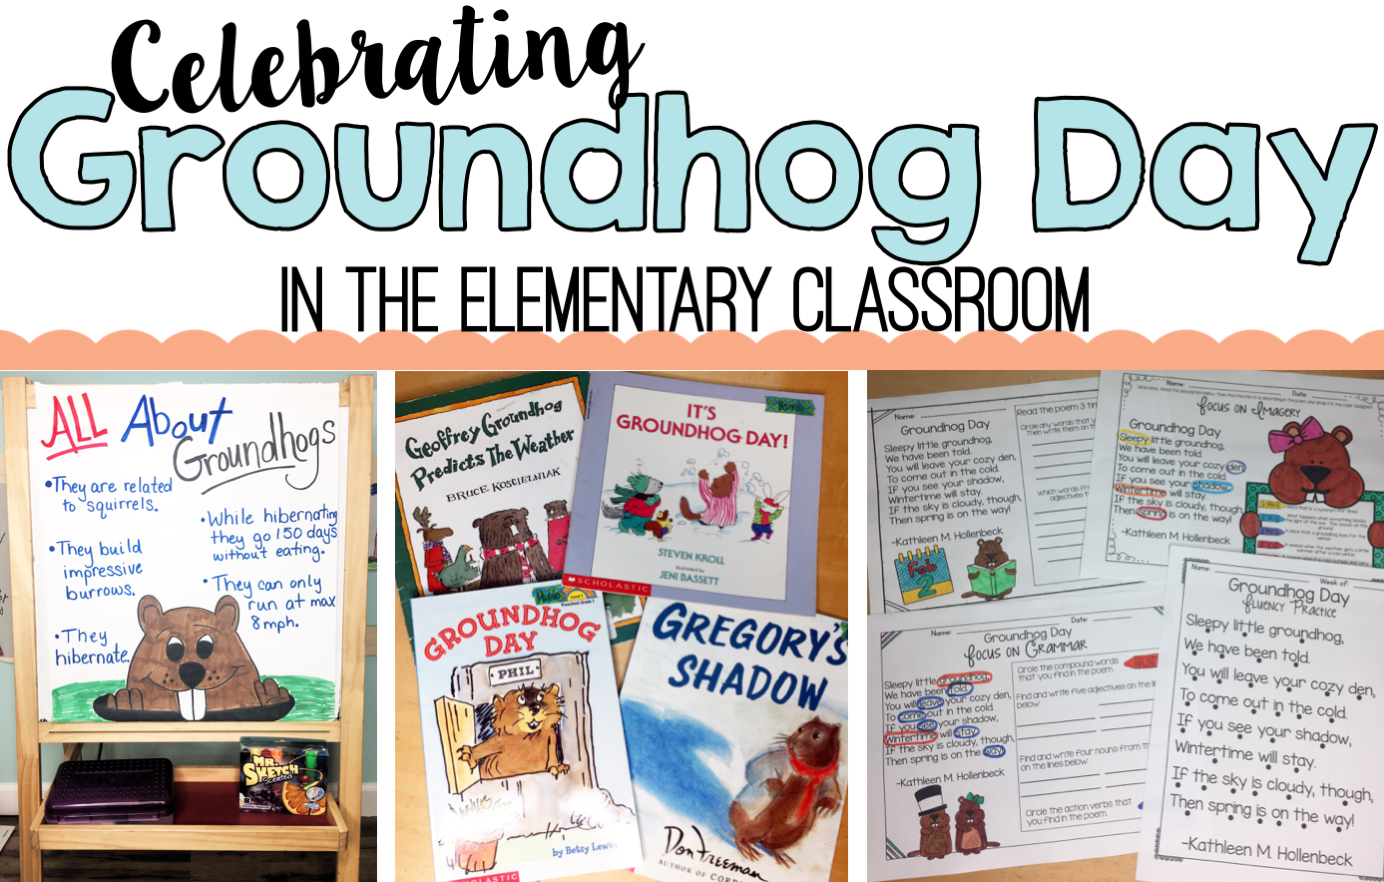 Celebrating Groundhog Day in the Elementary Classroom